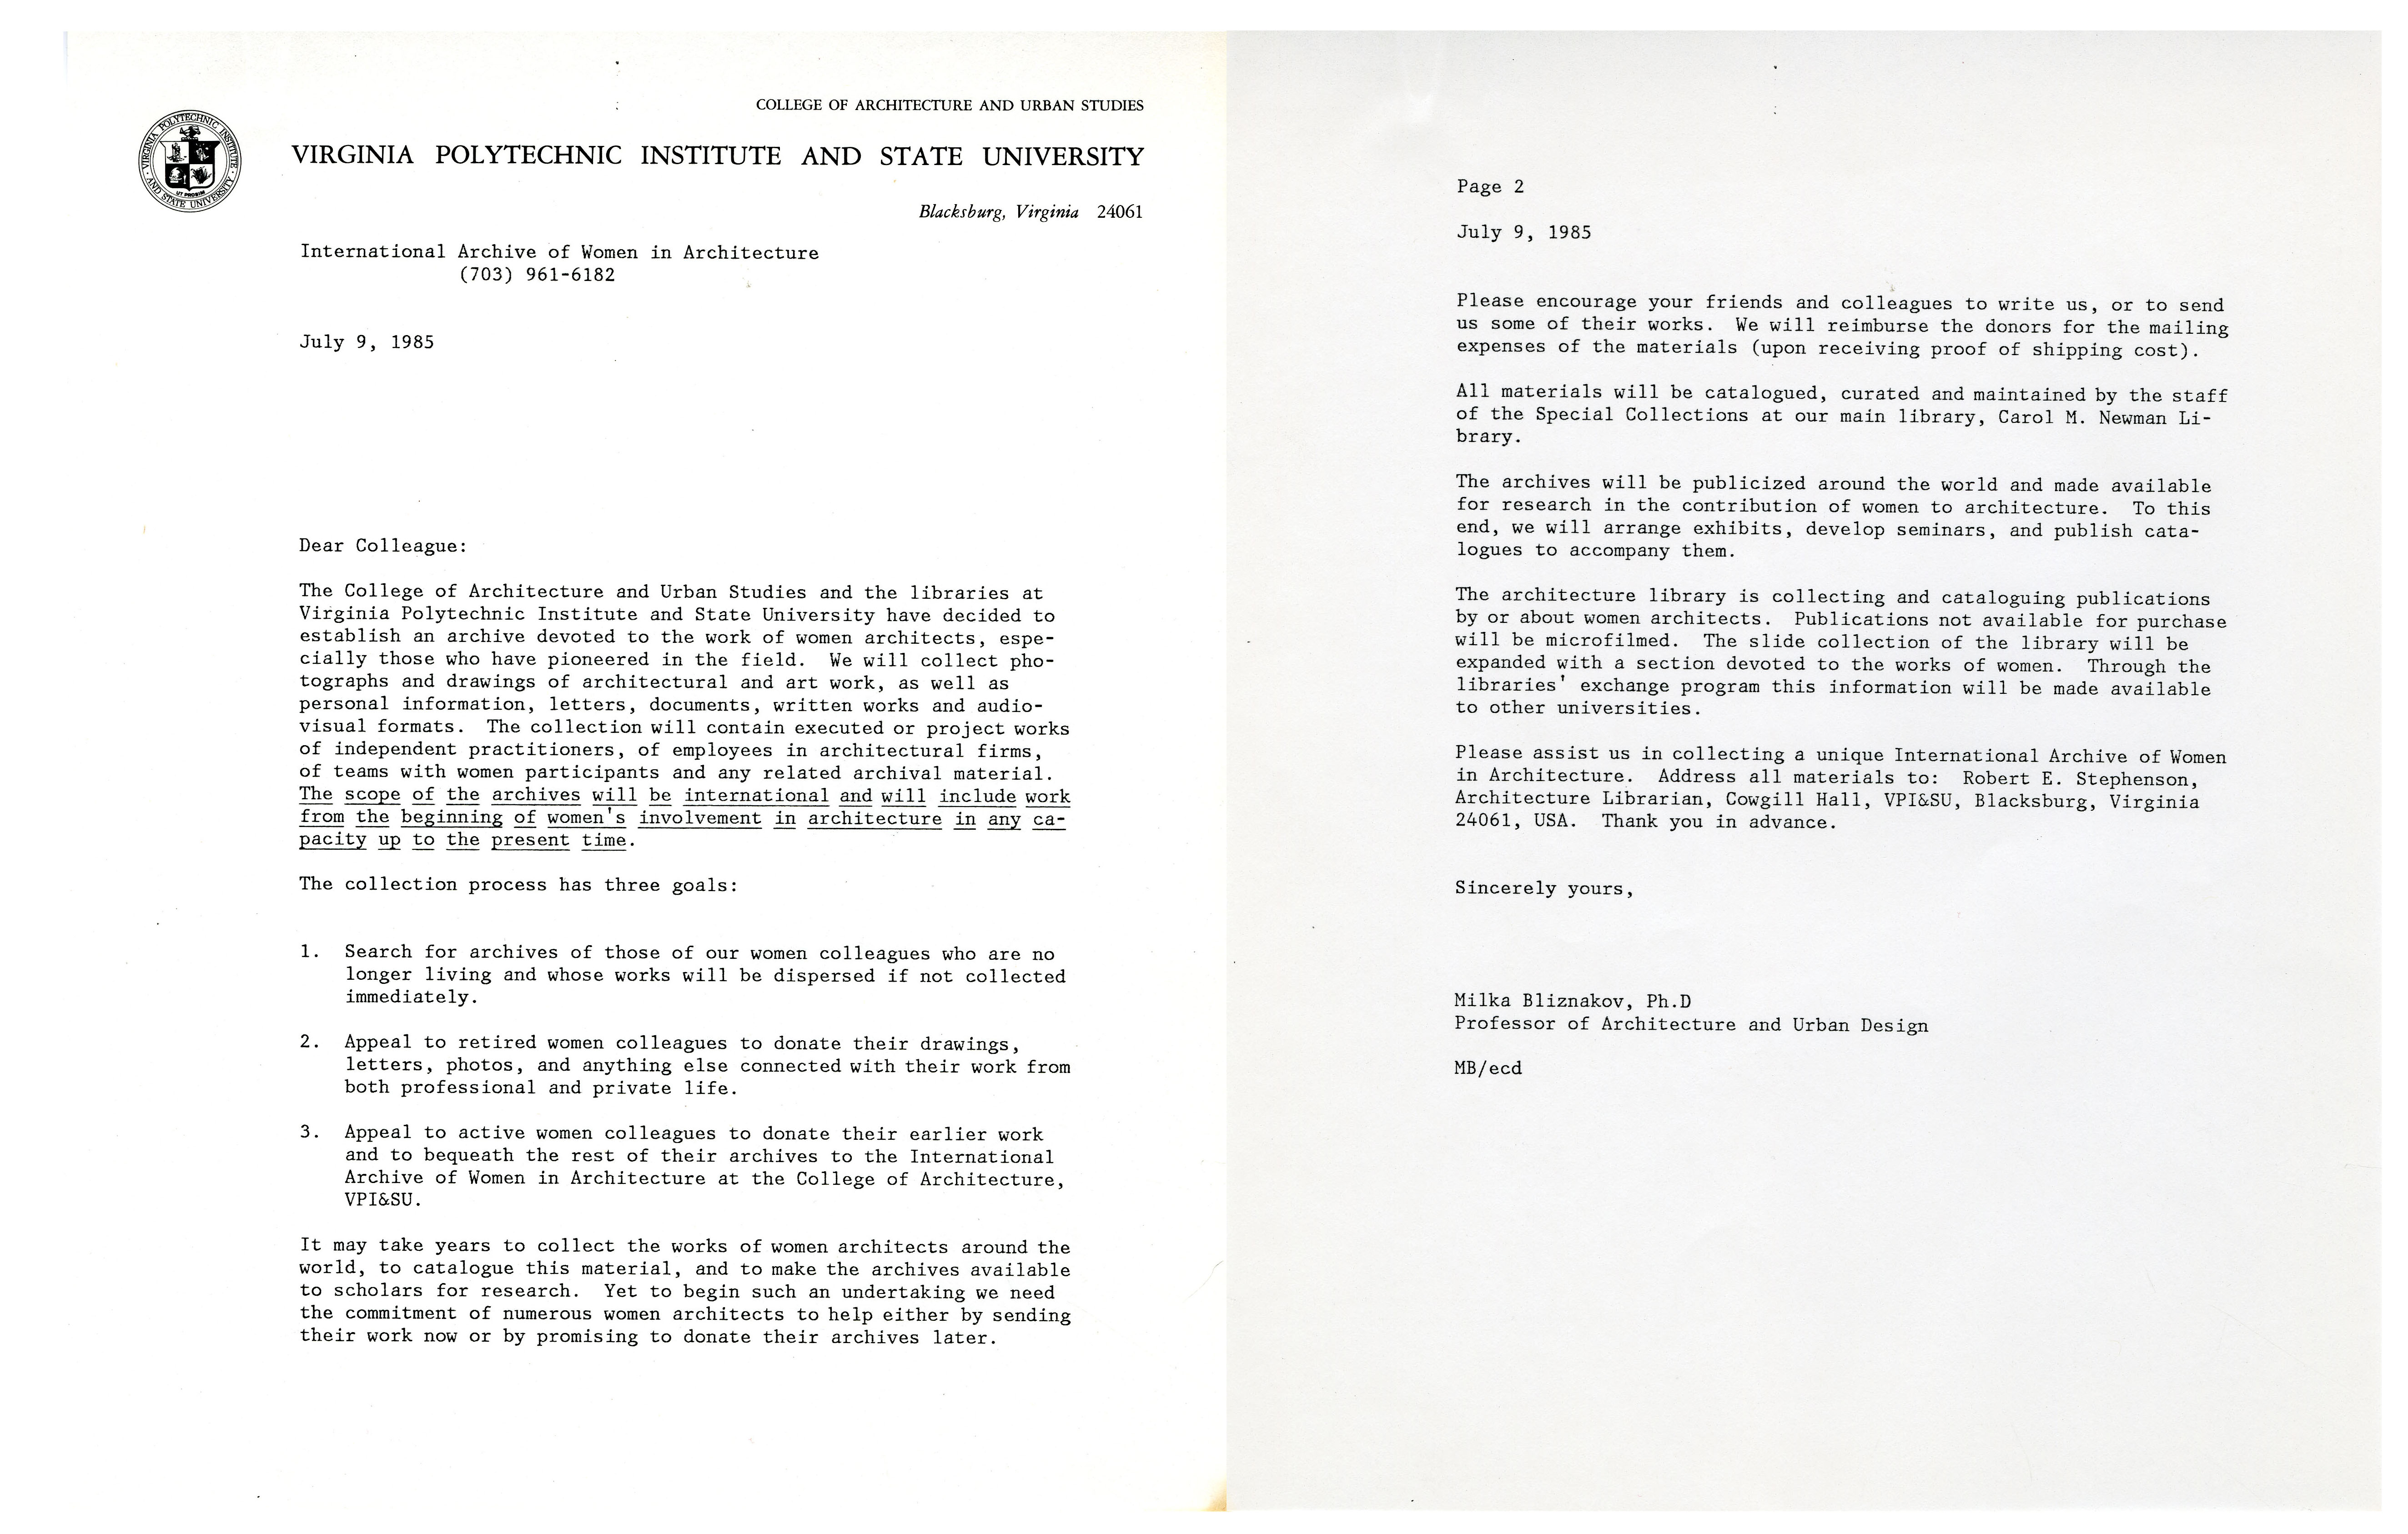 Two page donation request letter from Milka Bliznakov for the International Archives of Women in Architecture, July 1985